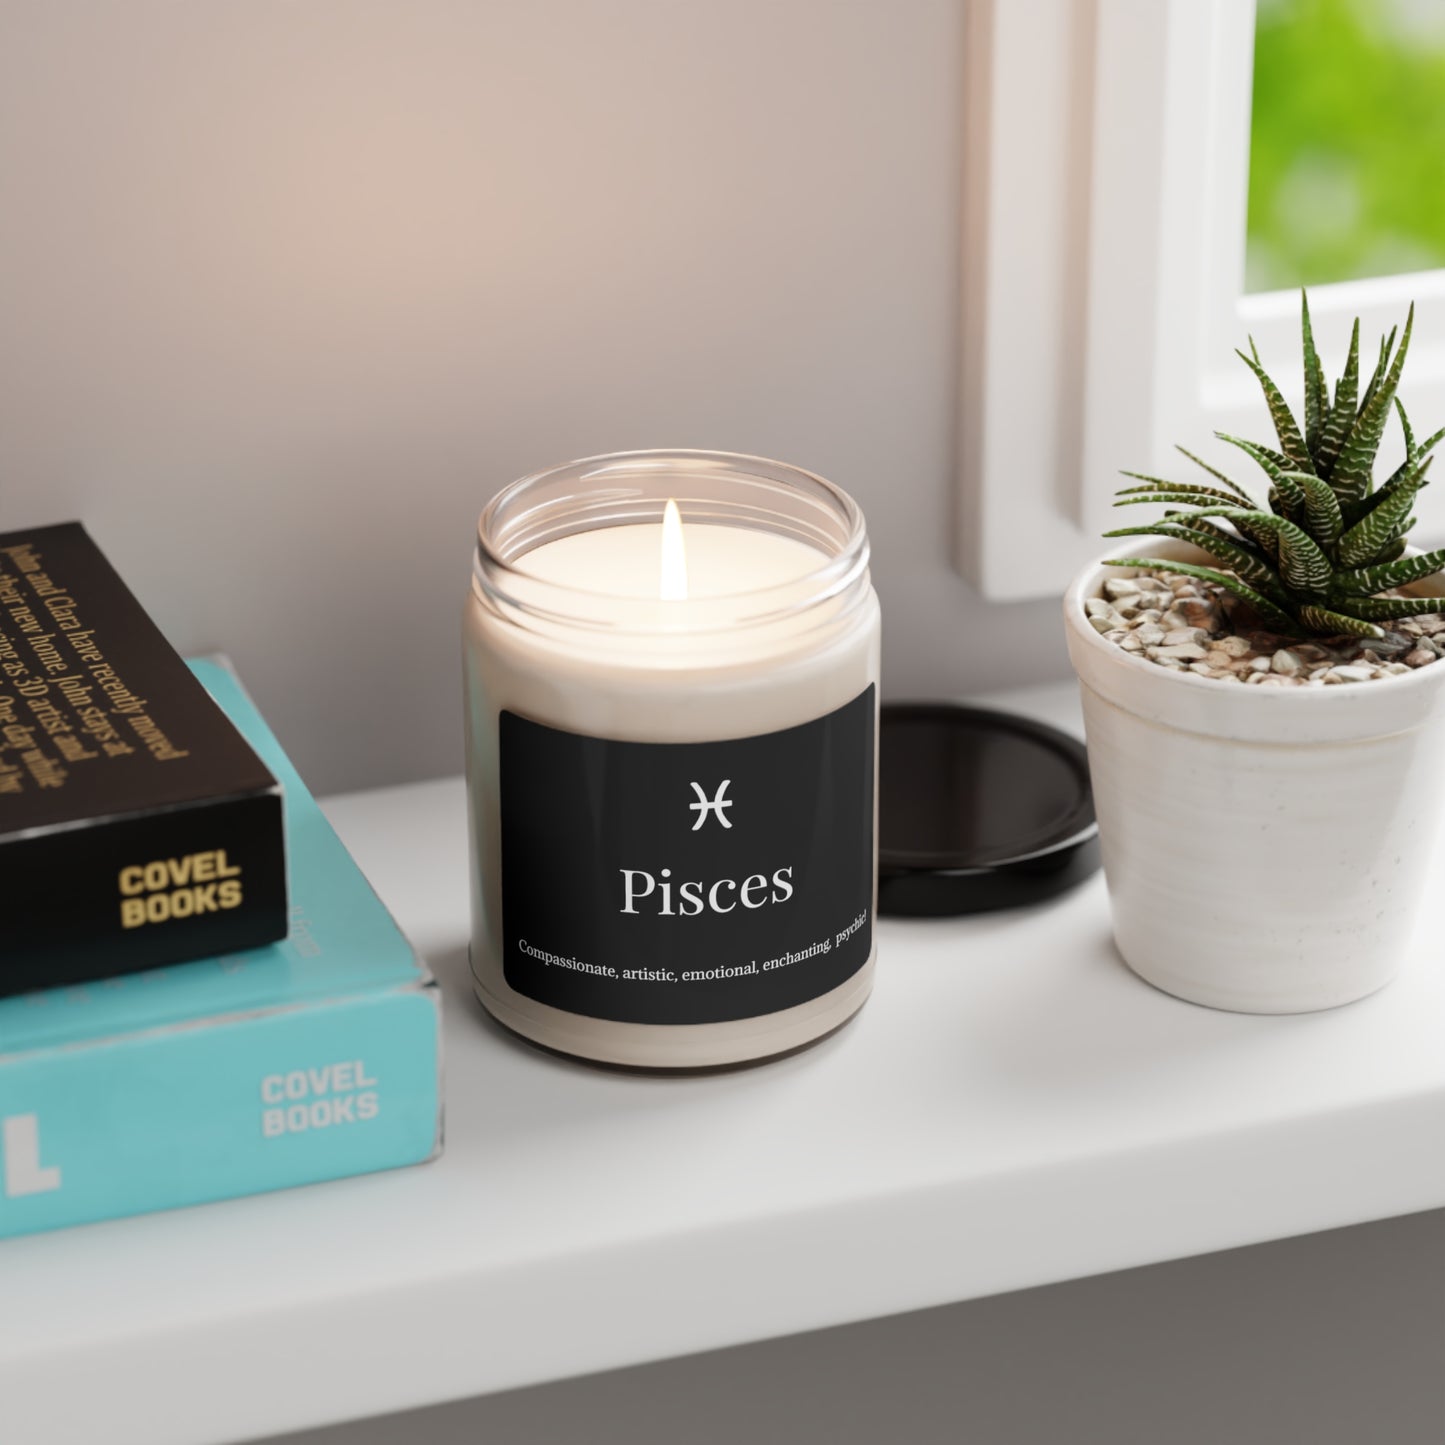 Pisces Scented Soy Candle